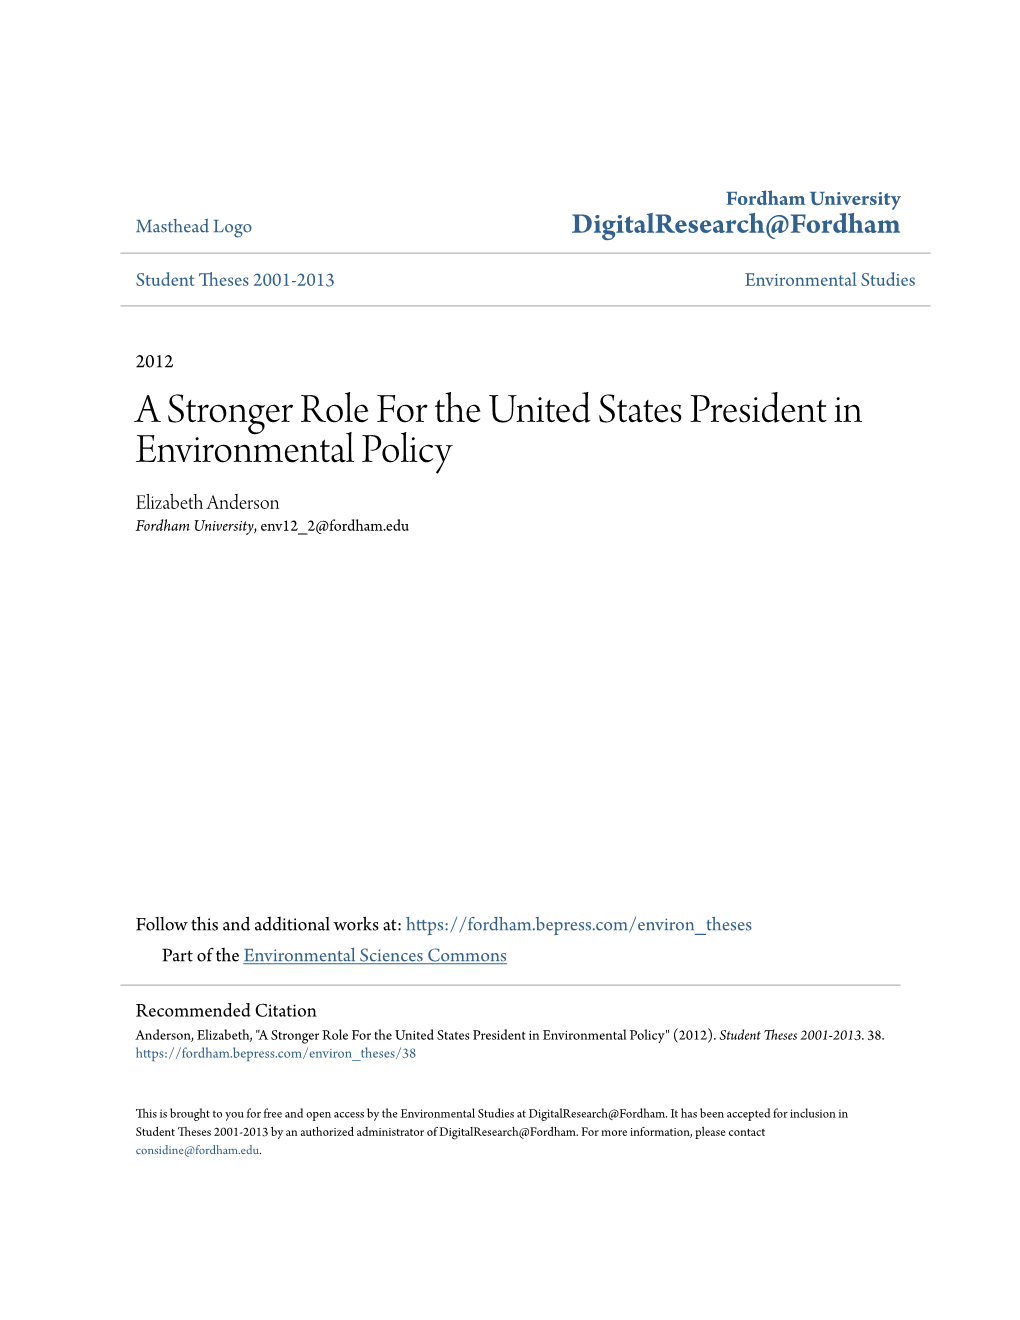 A Stronger Role for the United States President in Environmental Policy Elizabeth Anderson Fordham University, Env12 2@Fordham.Edu